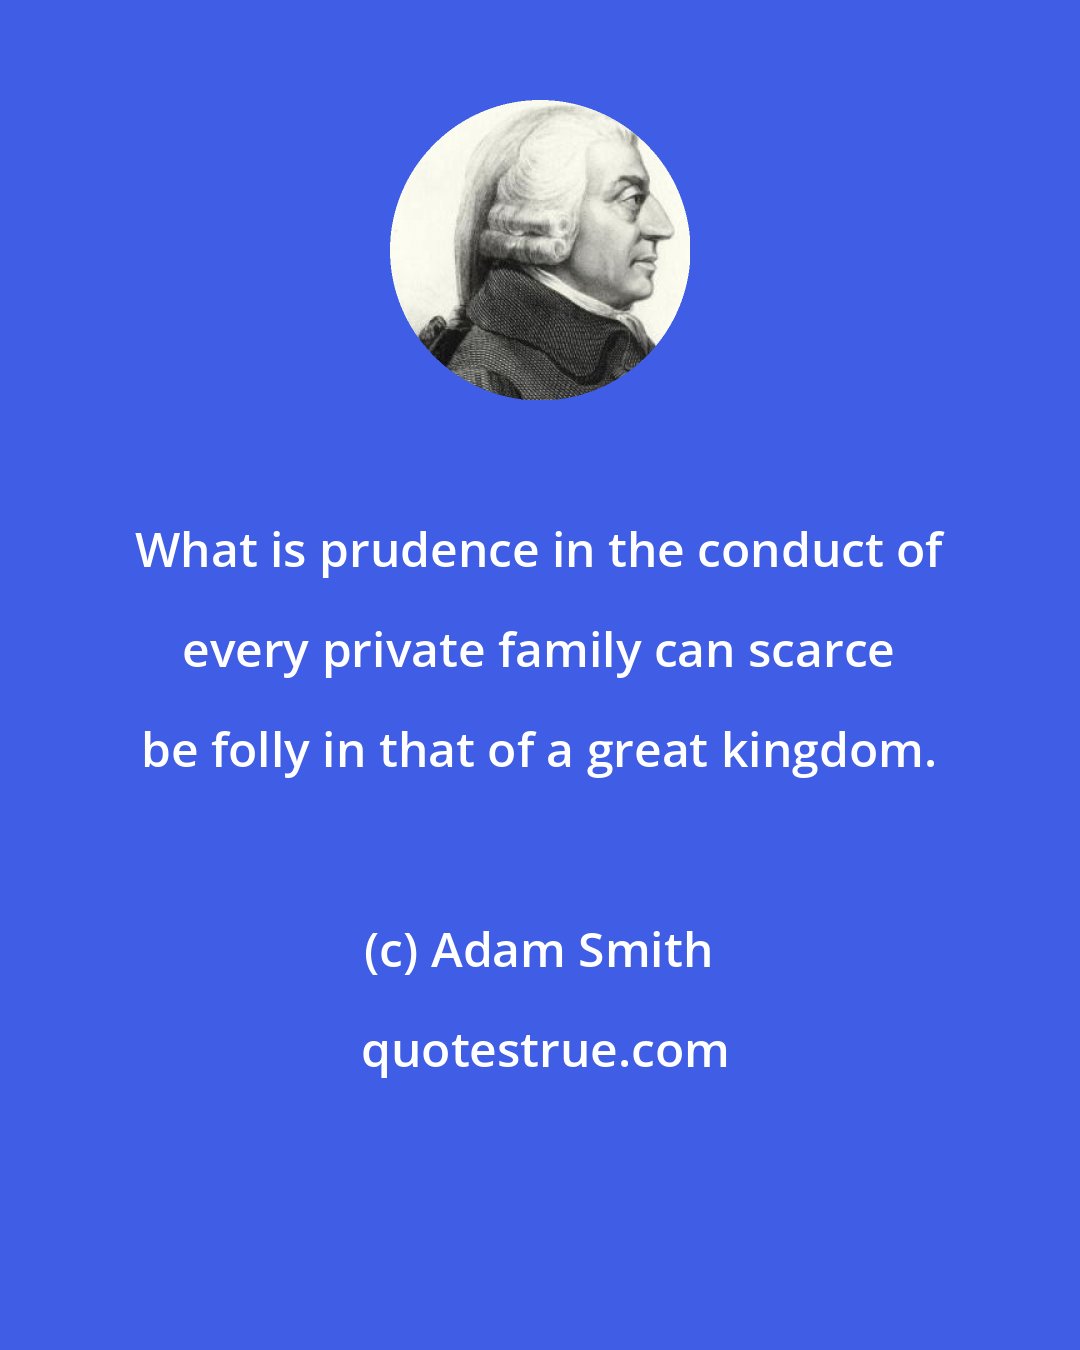 Adam Smith: What is prudence in the conduct of every private family can scarce be folly in that of a great kingdom.